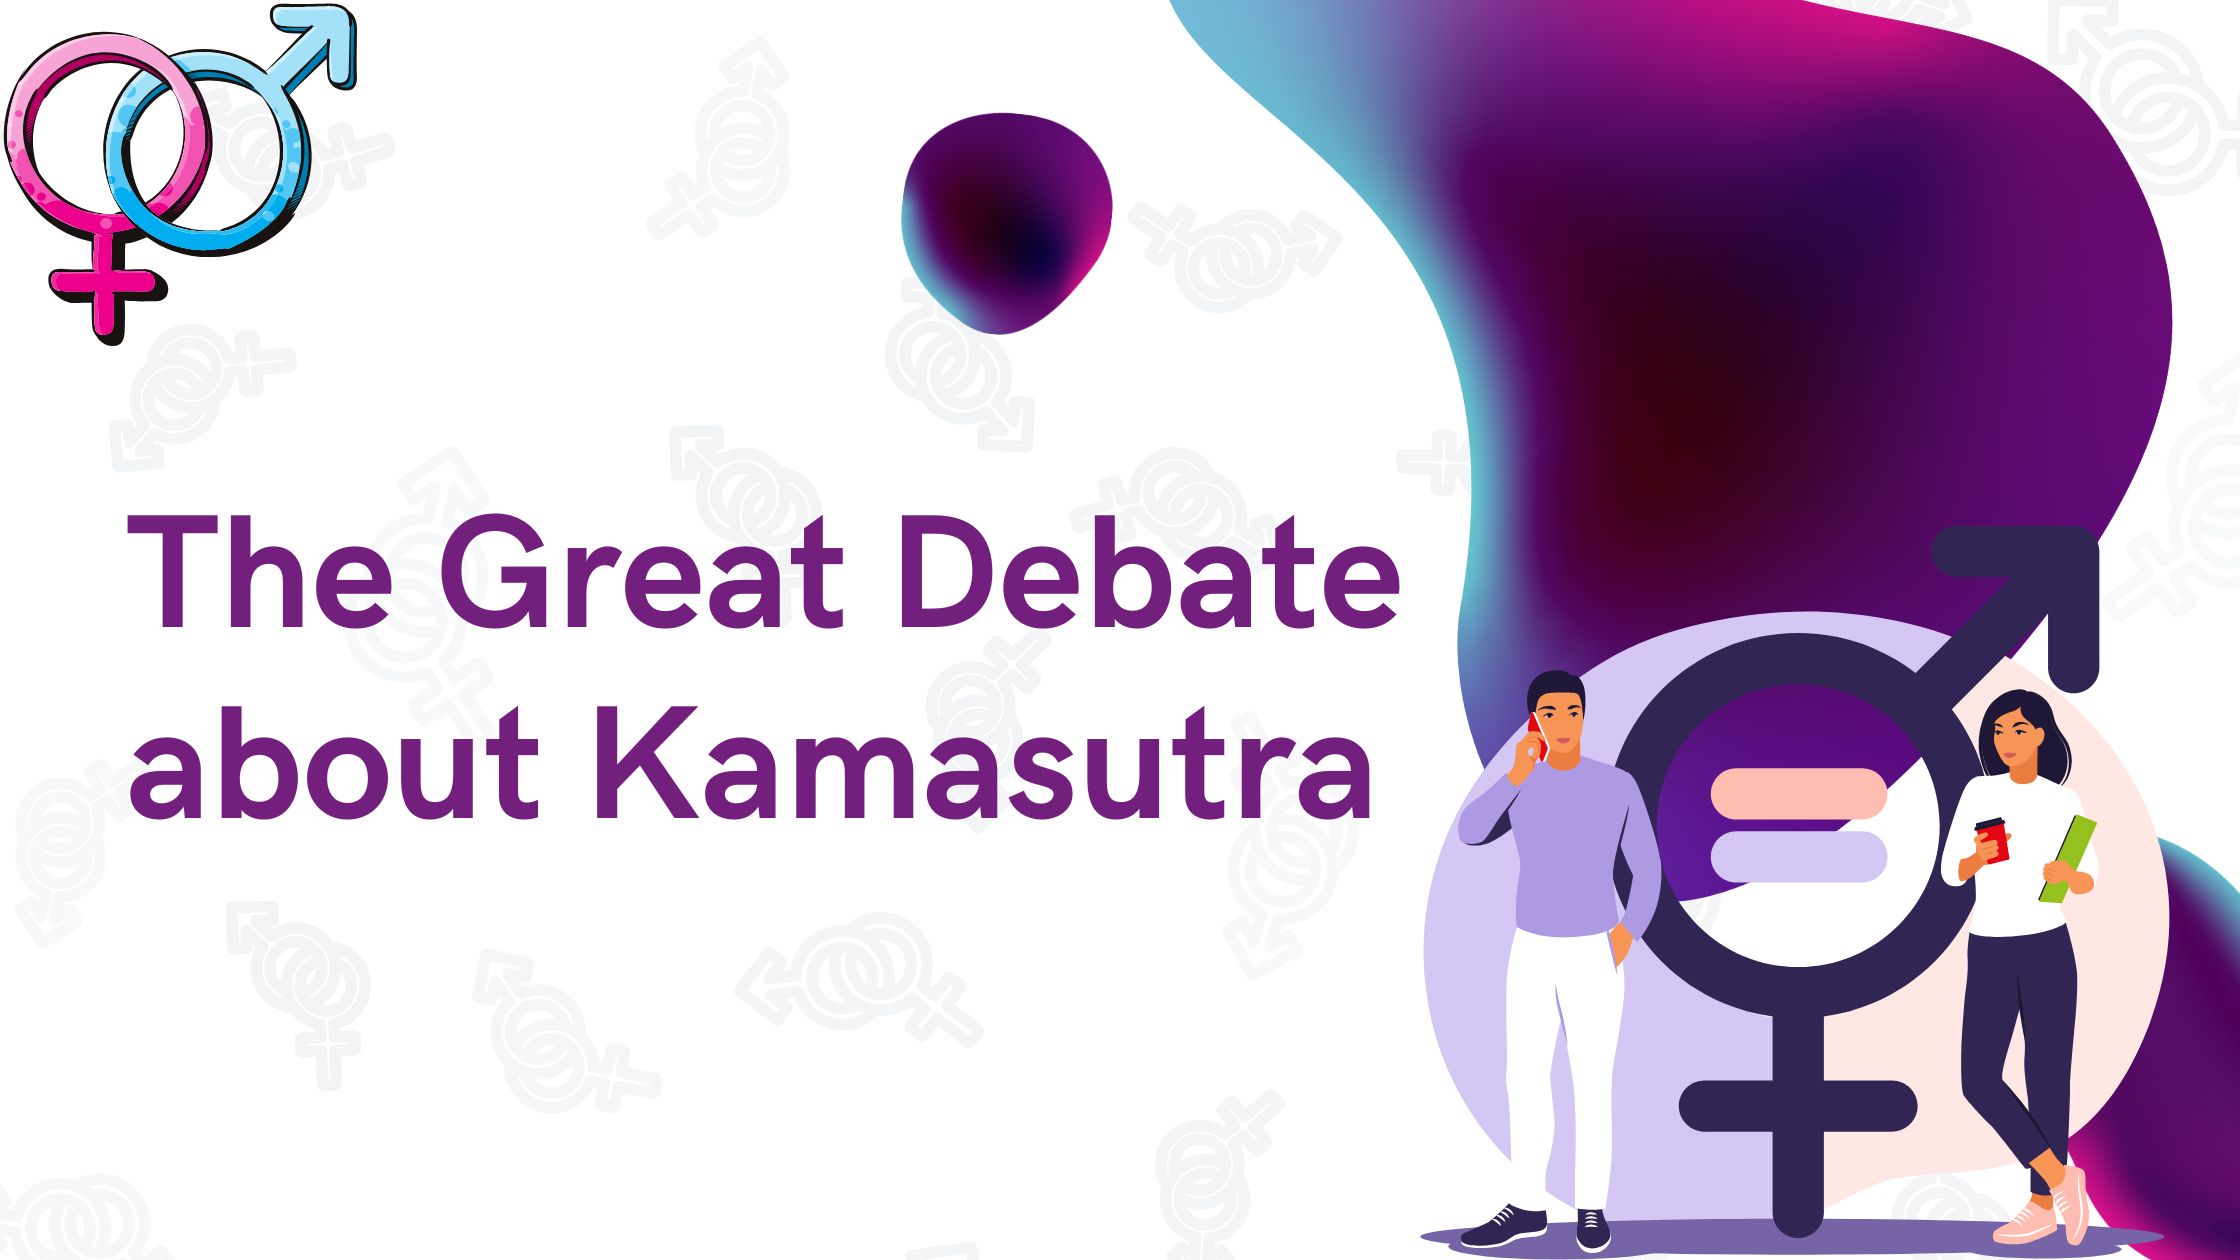 The Great Debate about Kamasutra